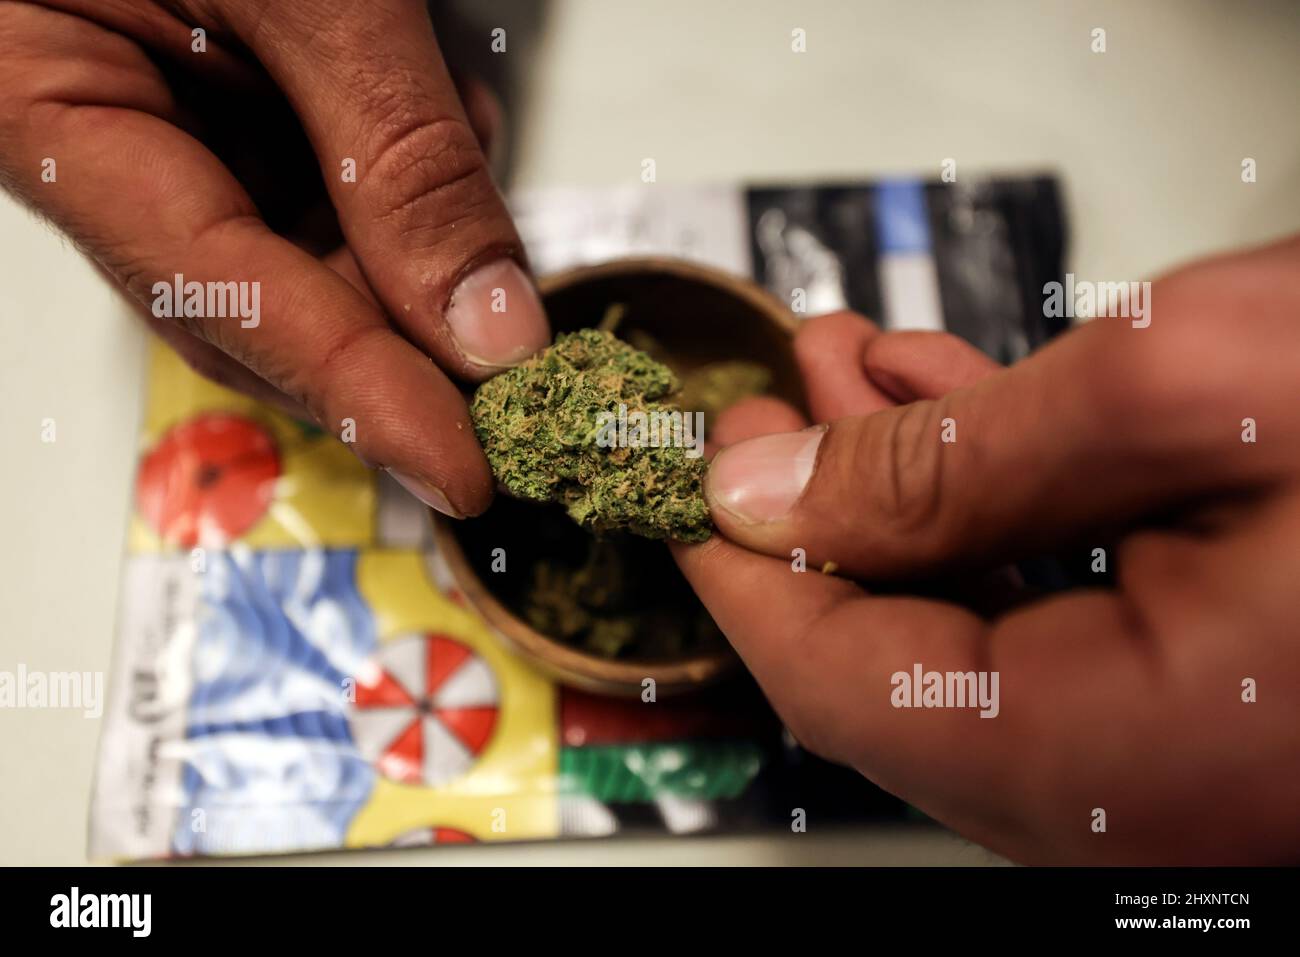 A worker prepares joints for customers at a medical cannabis cafe in Tira, an Arab village in central Israel March 2, 2022. Picture taken on March 2, 2022. REUTERS/Ammar Awad Stock Photo